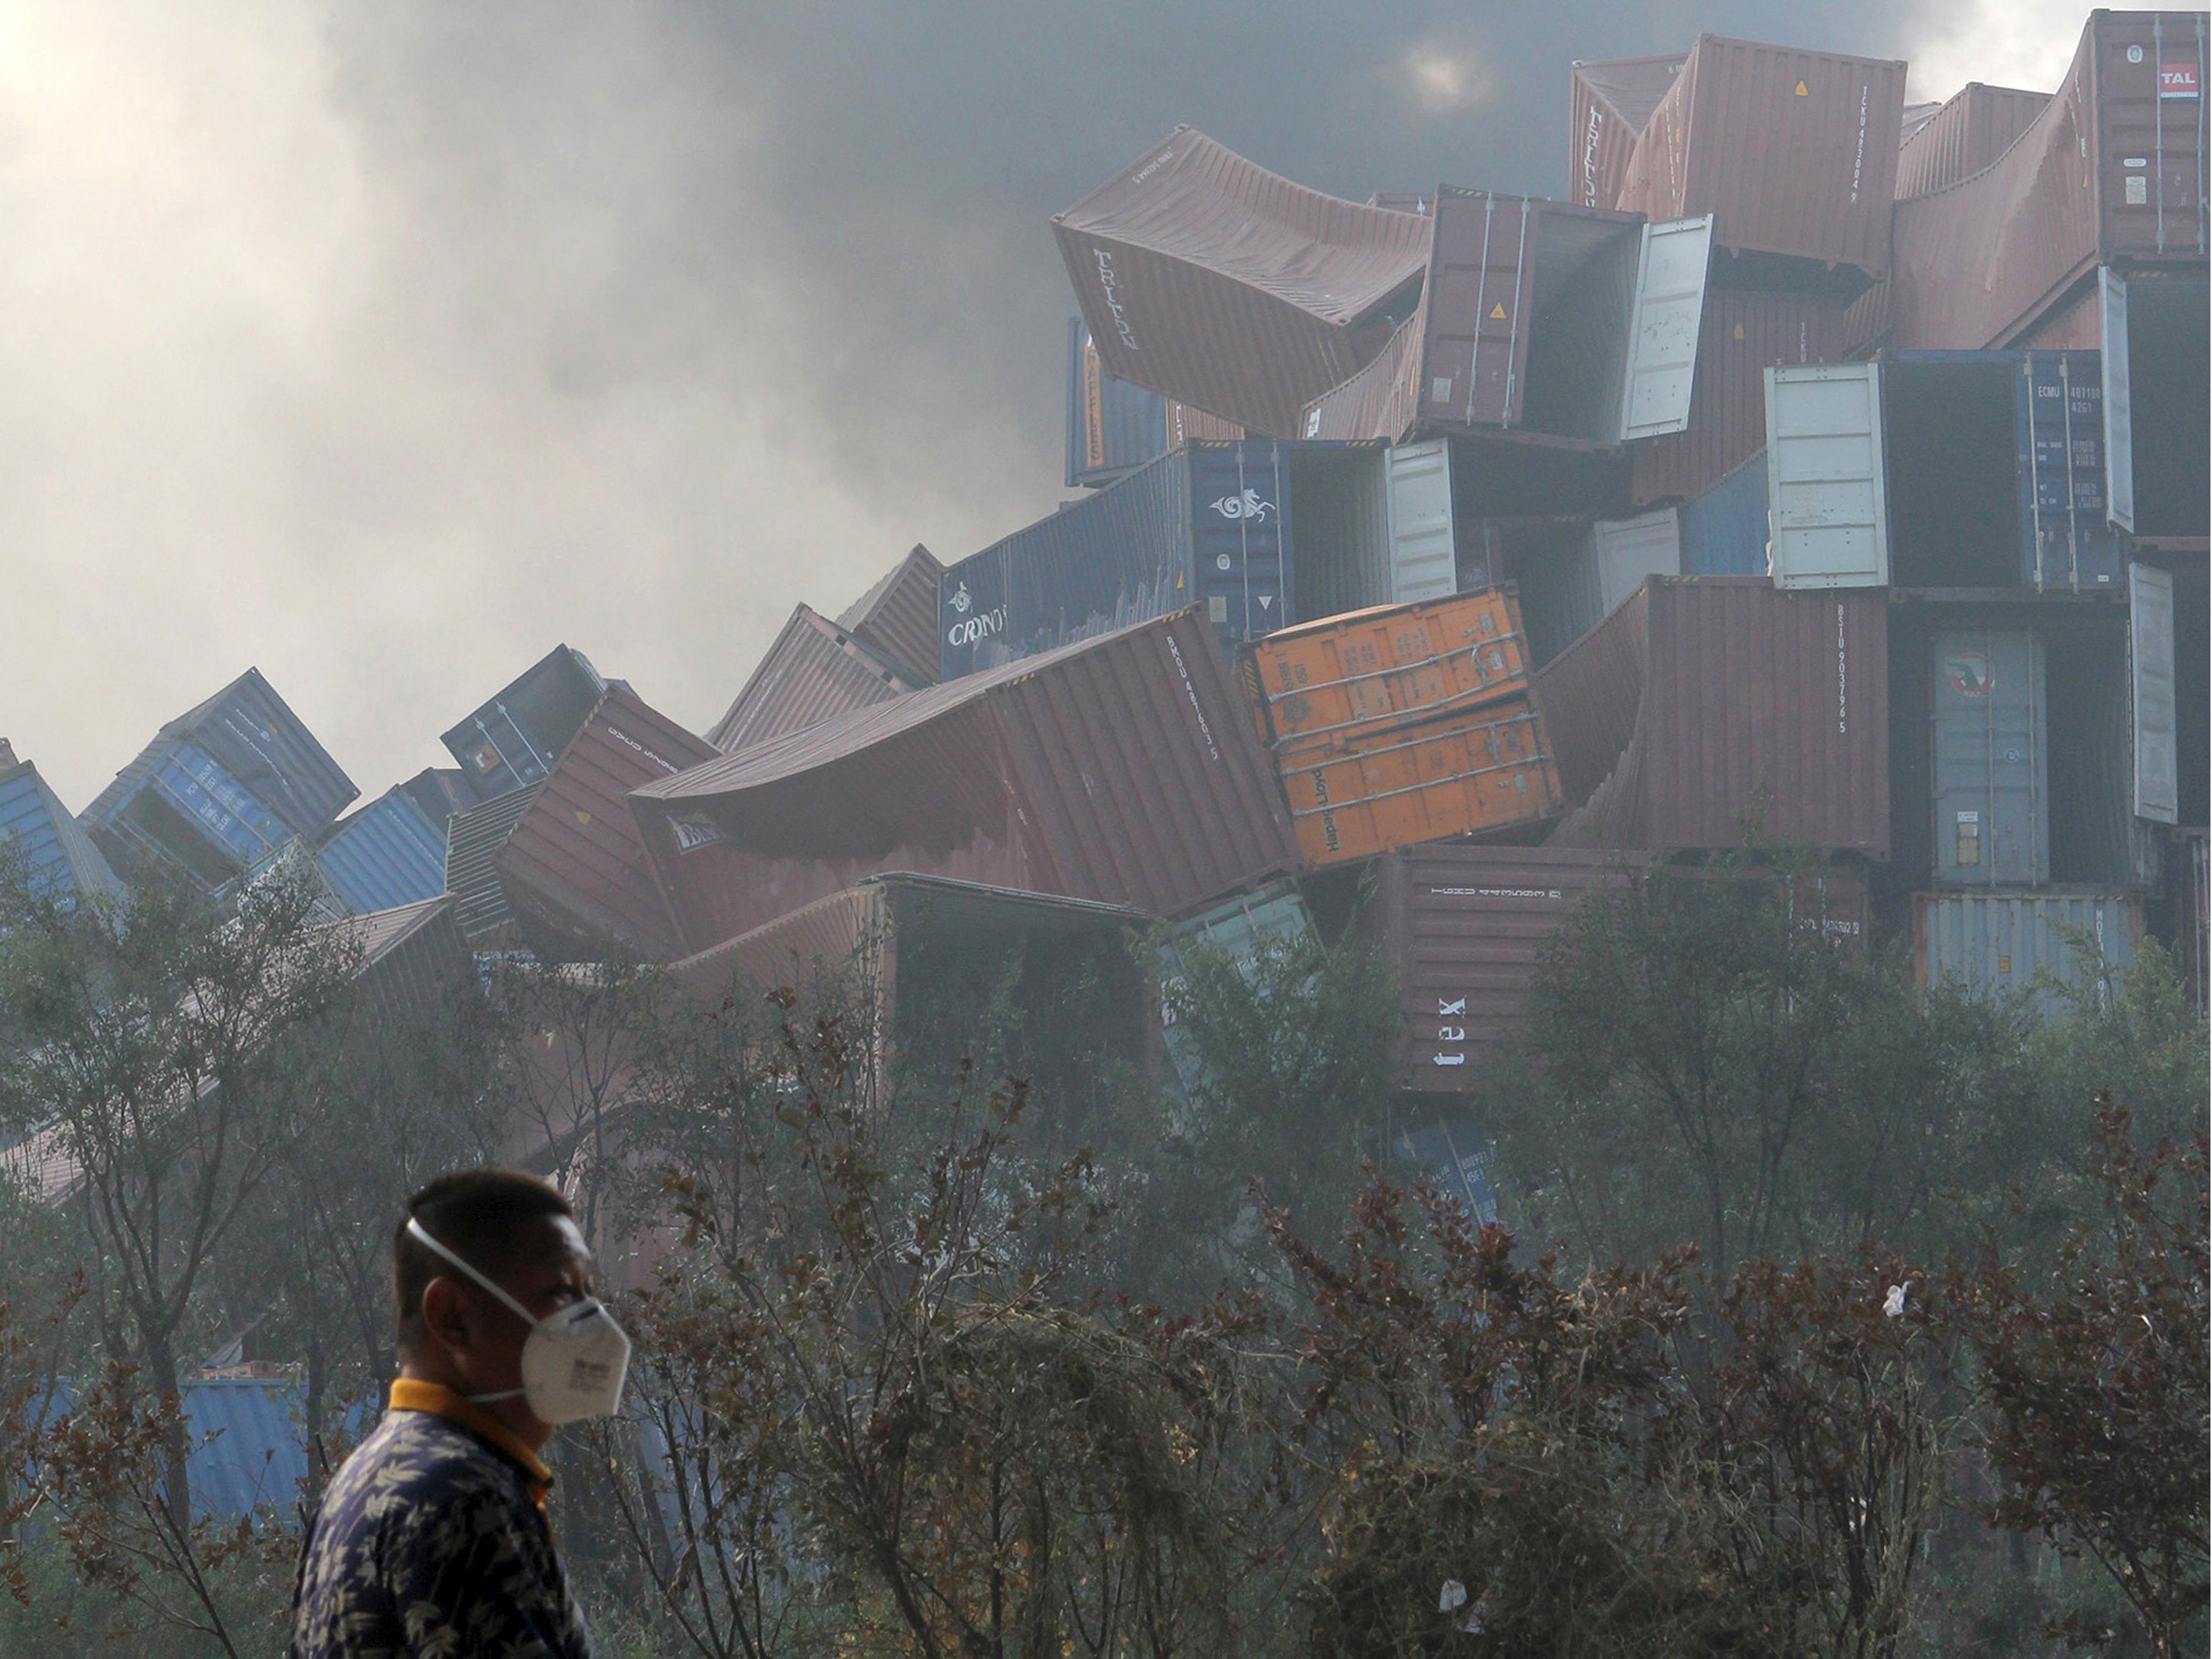 A man wearing a mask walks past overturned shipping containers after explosions hit the Binhai new district in Tianjin.